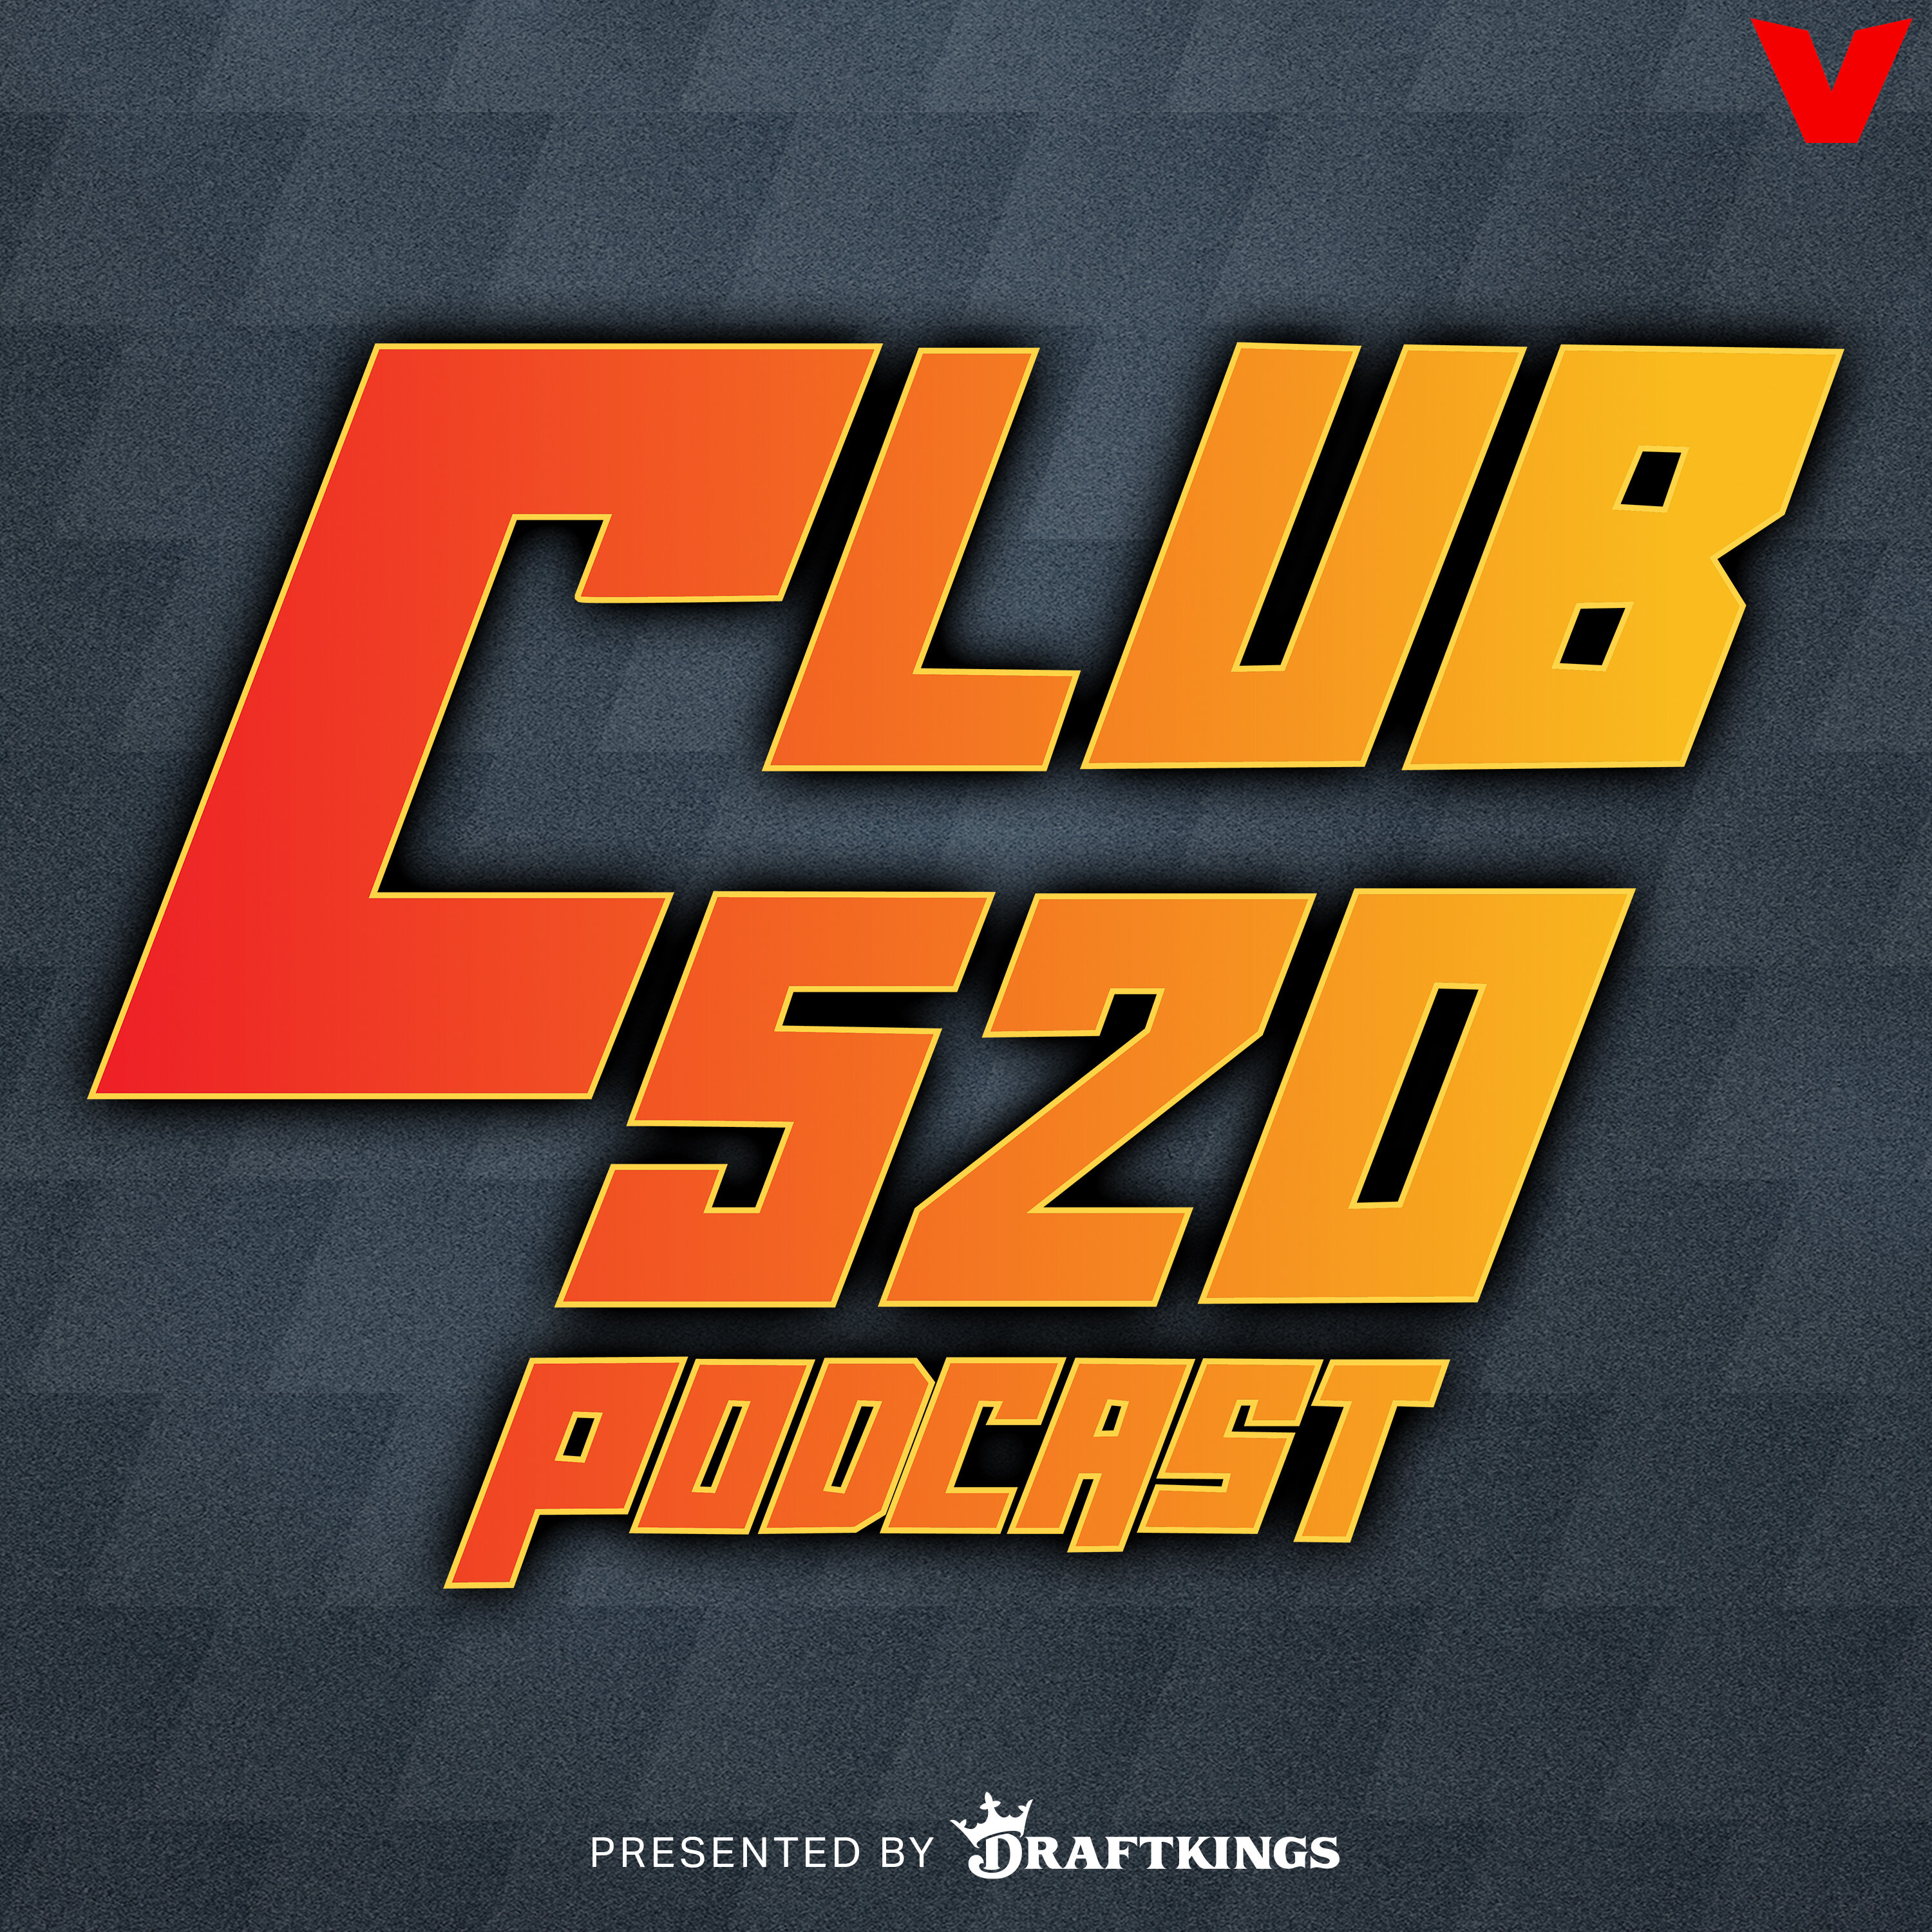 Club 520 - Jeff Teague & Donovan Mitchell on GOING OFF in the NBA bubble, facing Anthony Edwards & James Harden